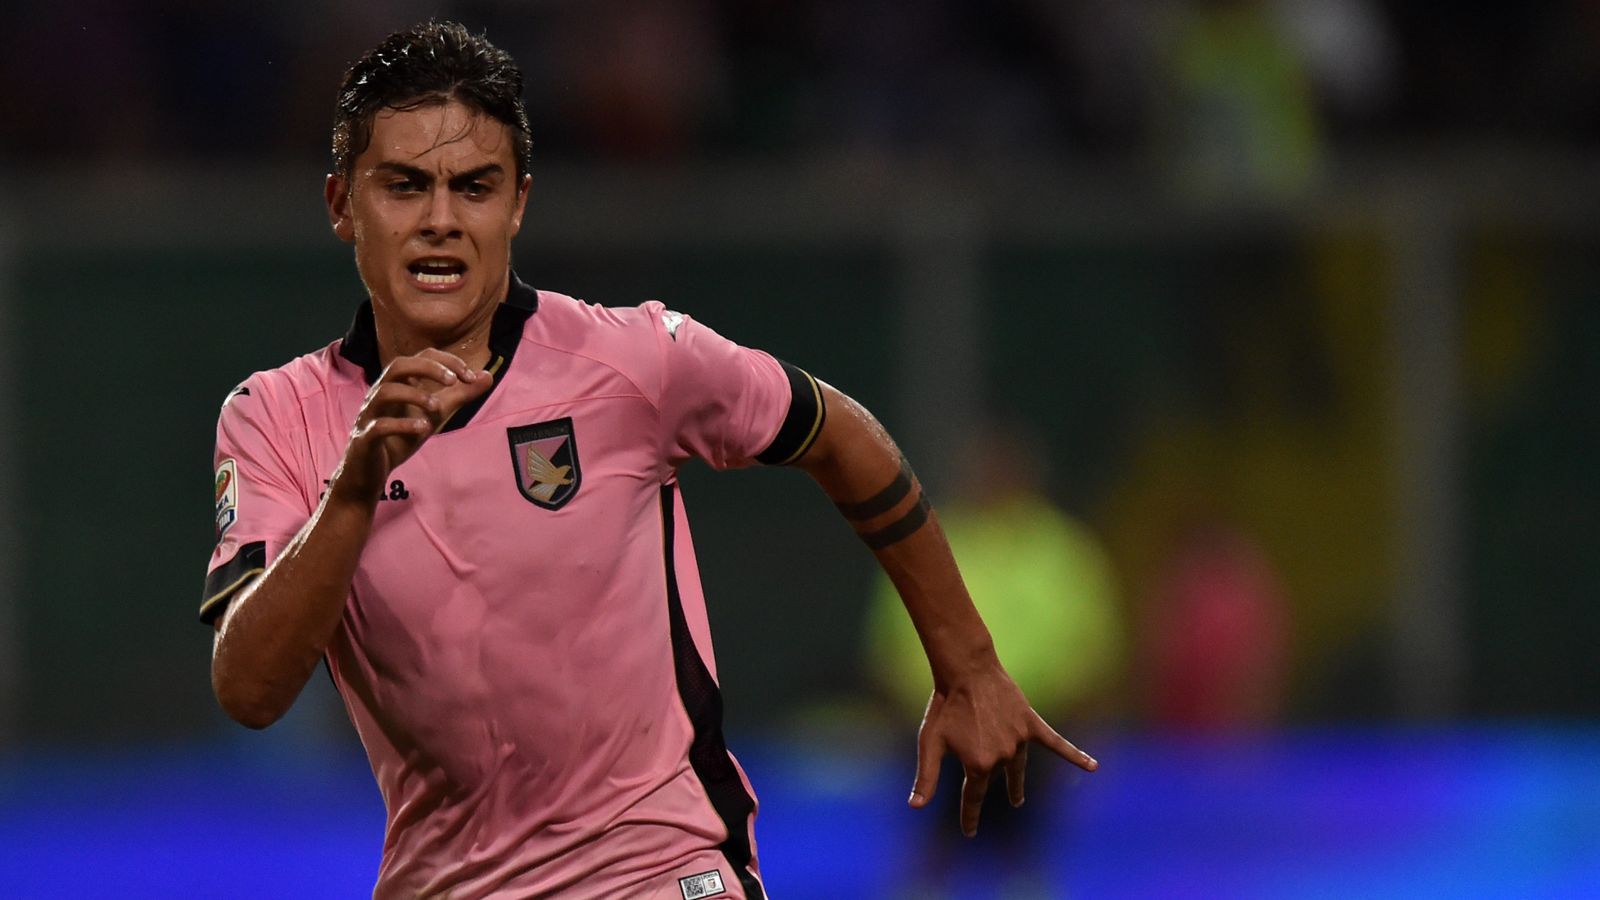 US Palermo News, Fixtures & Results, Table, Players